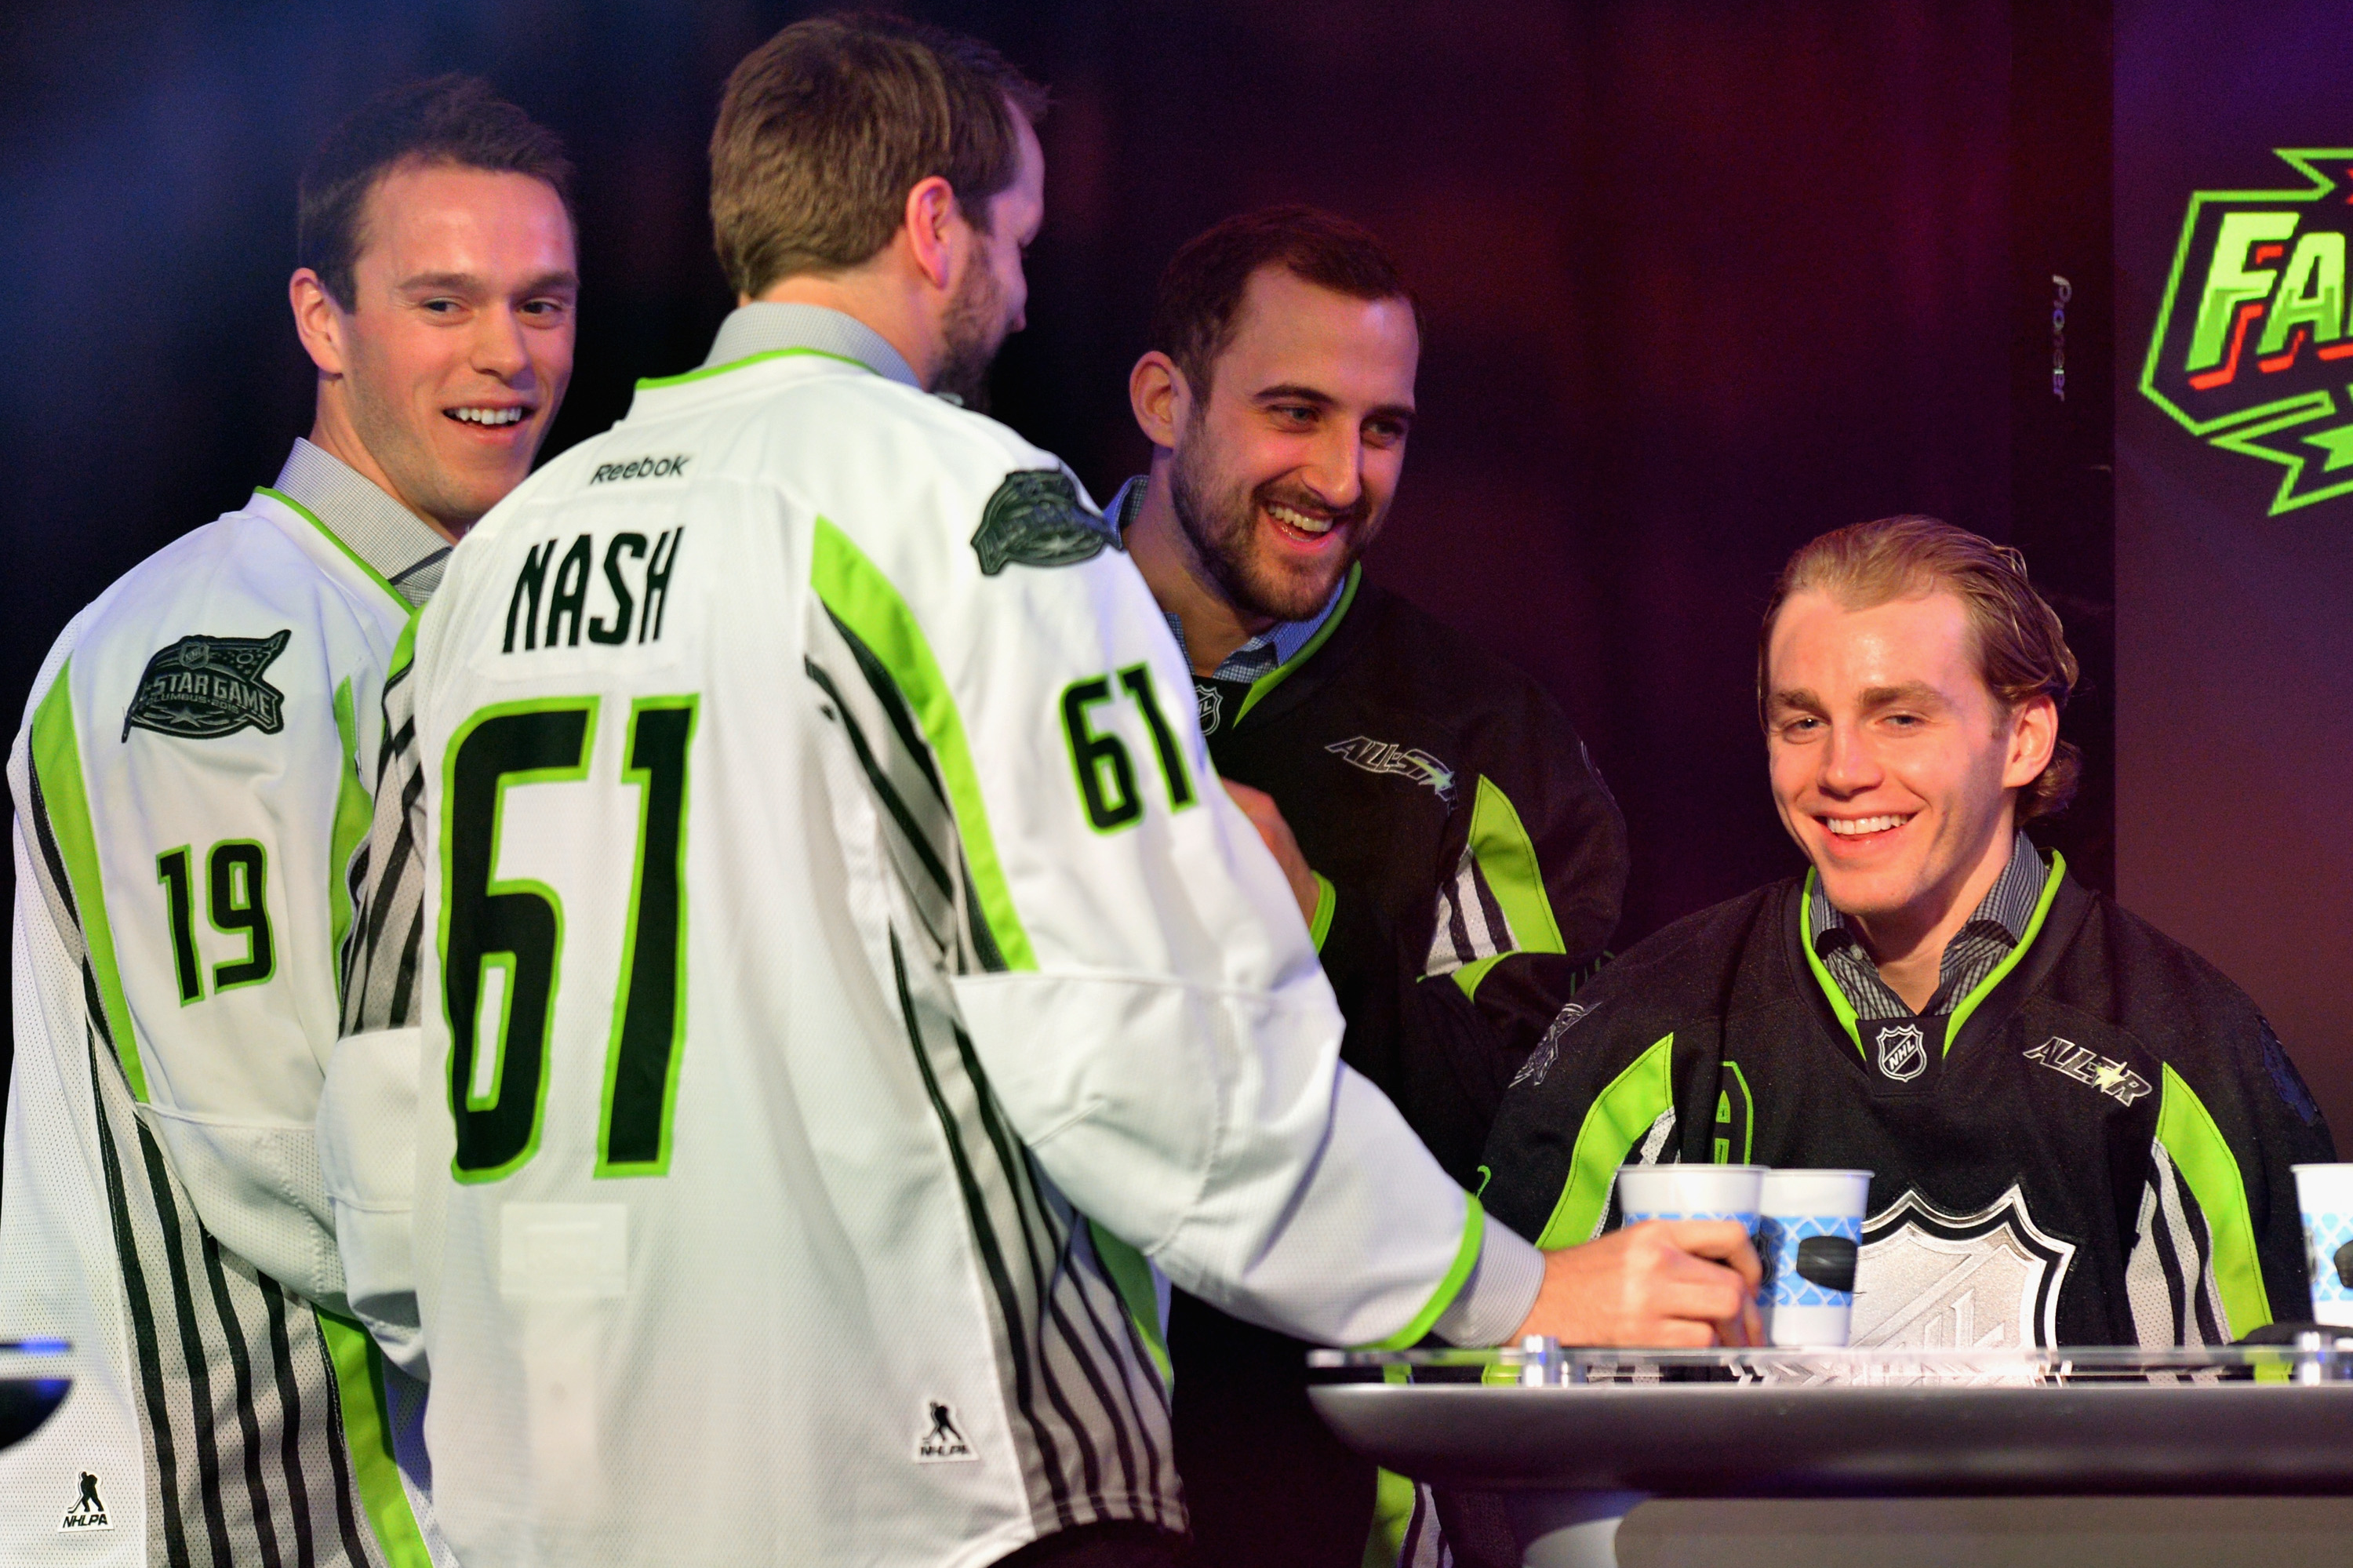 NHL All Star Game 2015: Draft, Players & Rosters